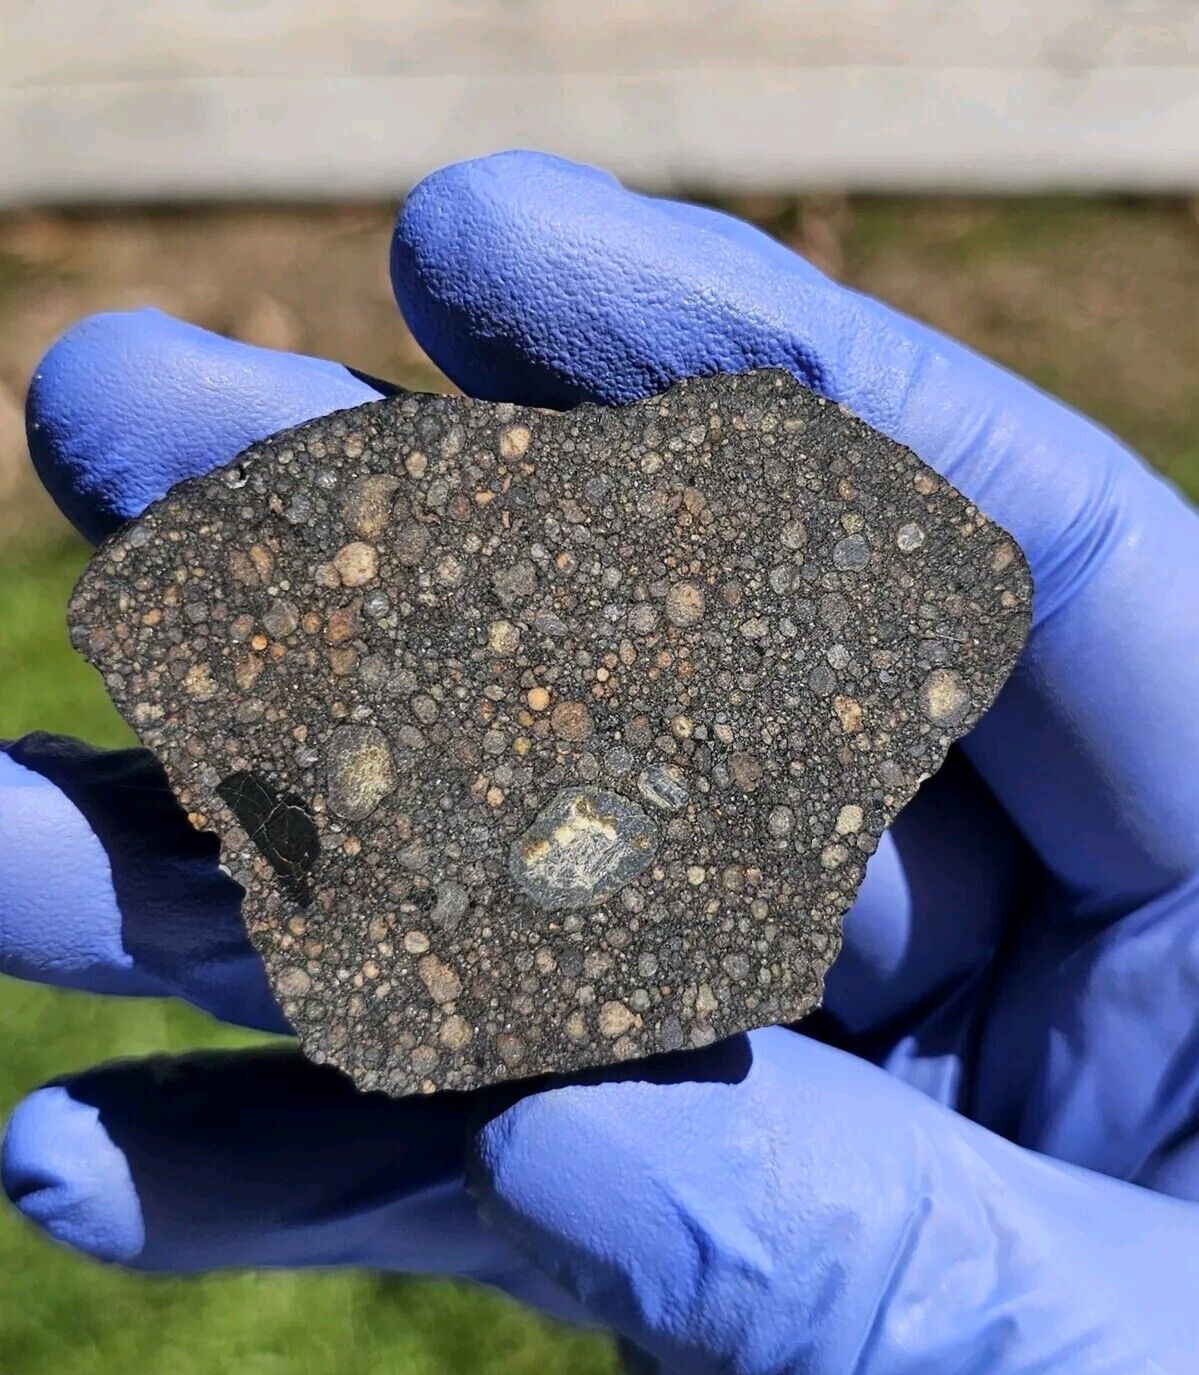 Meteorite**NWA 14916, LL3**14.944 grams, W/Gorgeous Colored Chondrules Type 3